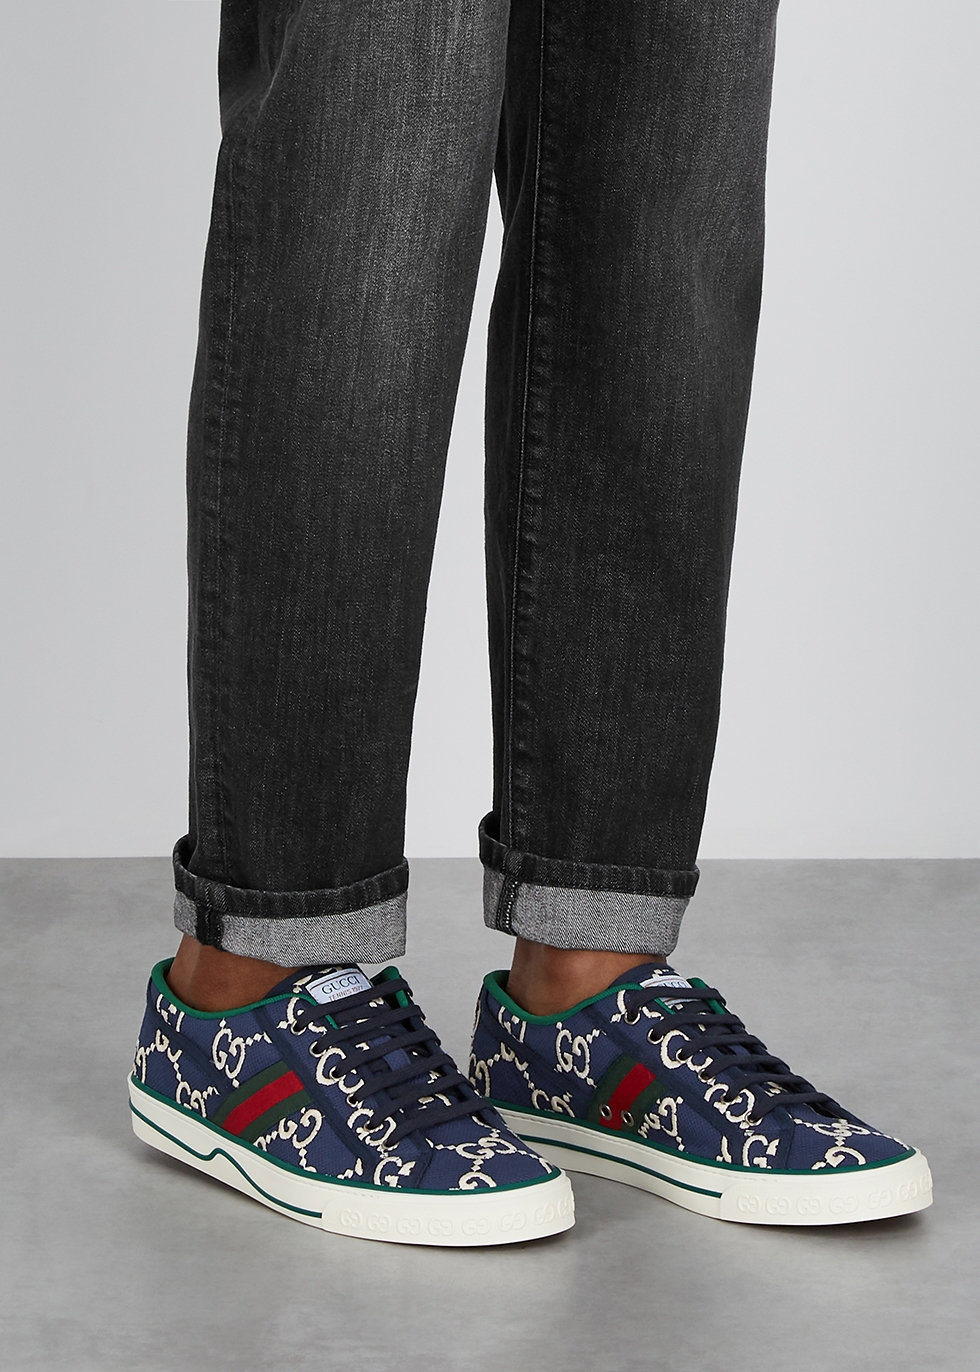 navy gucci sneakers